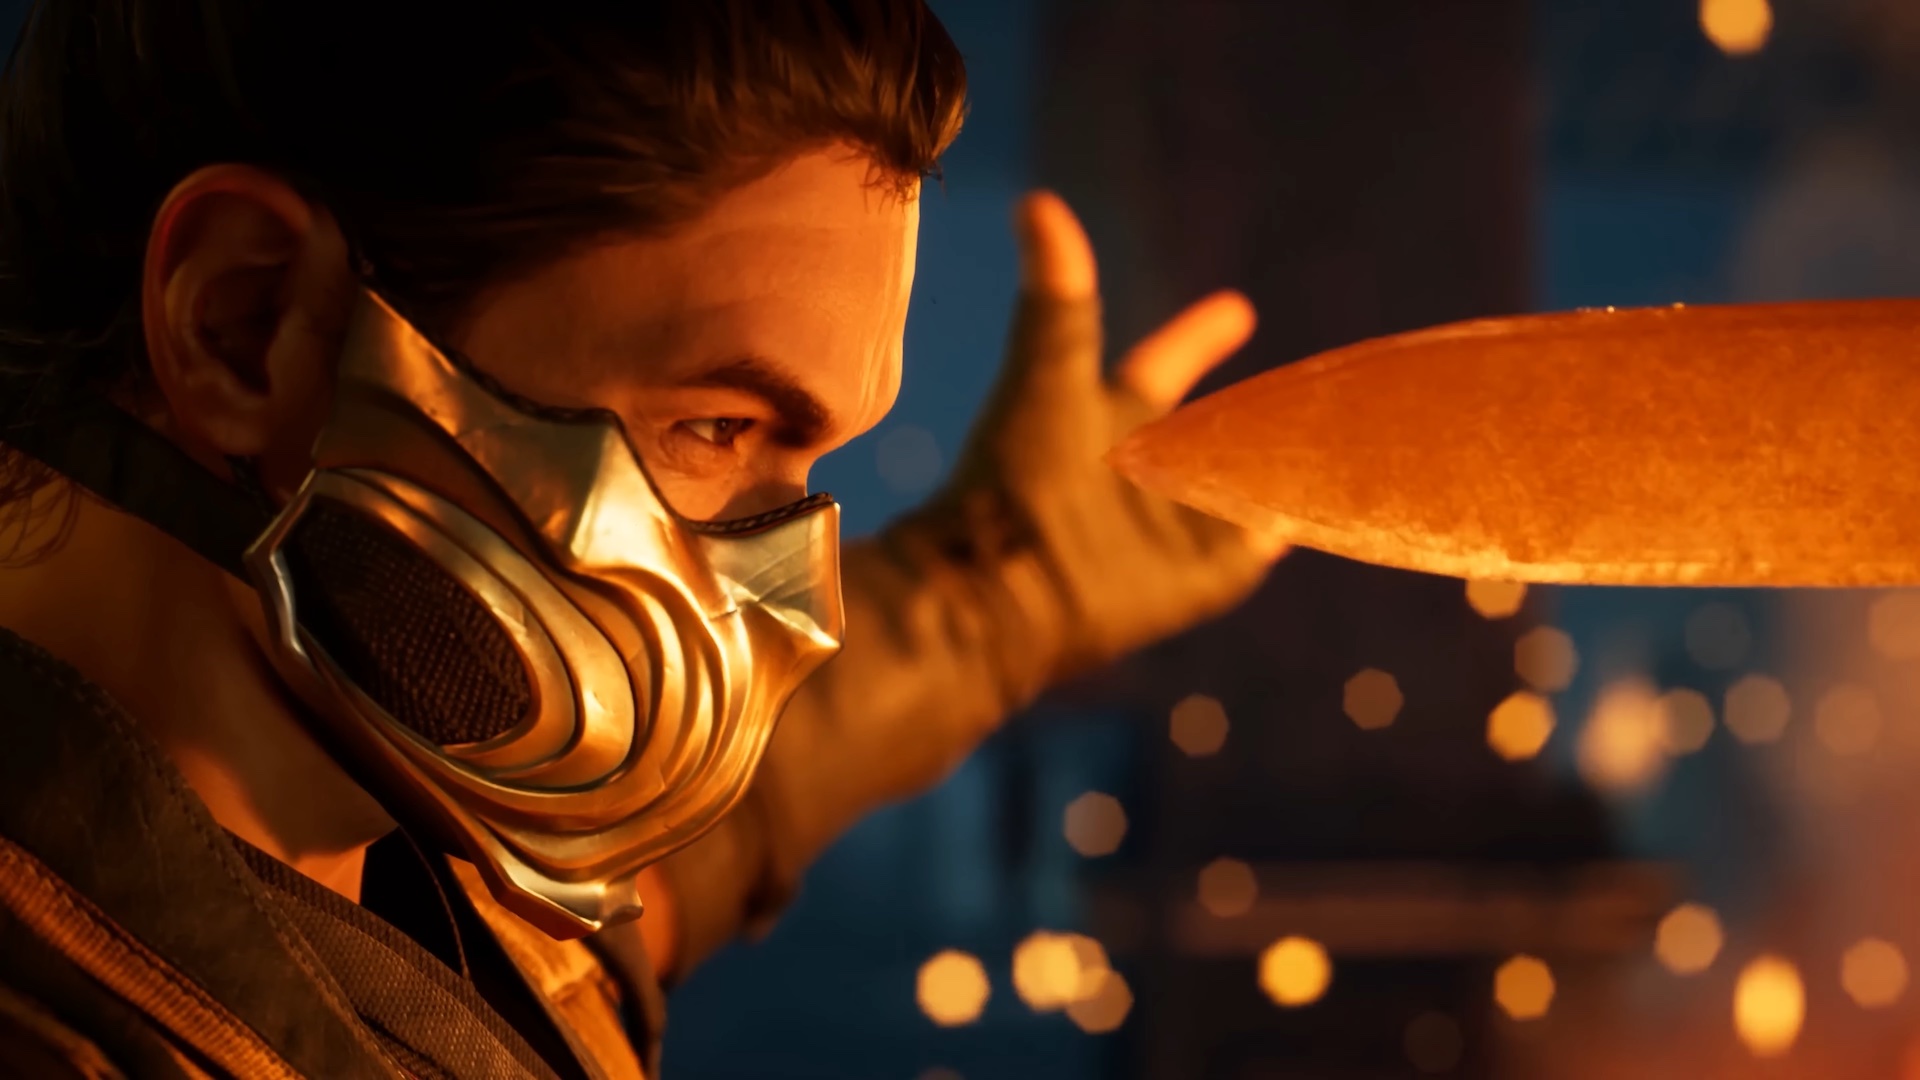 The Ending to 'Mortal Kombat 11' Aftermath Explained